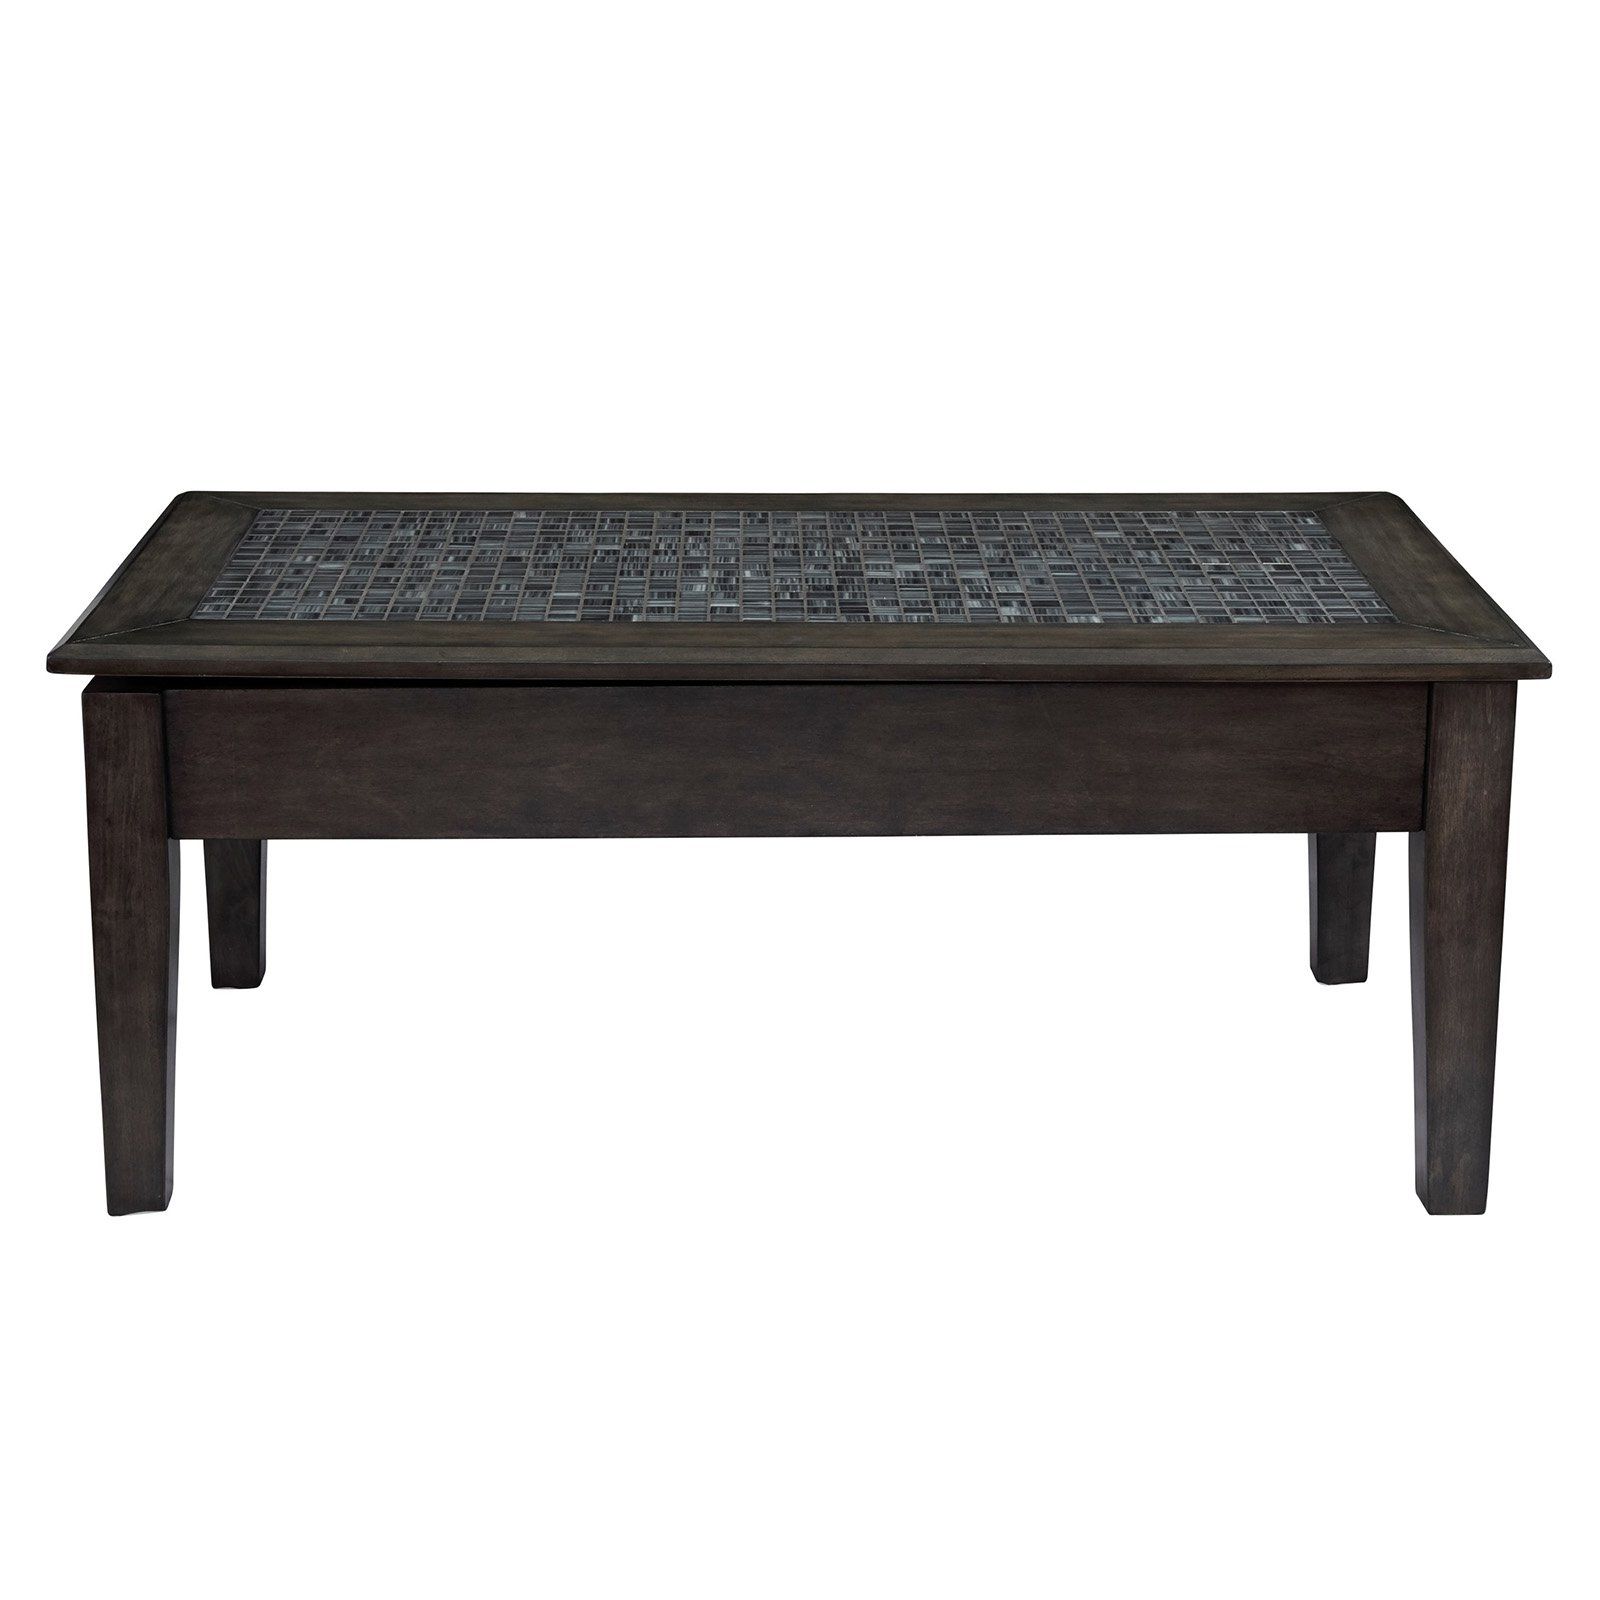 Well Liked Gray Wood Veneer Cocktail Tables Regarding Grey Mosaic Lift Top Cocktail Table Quantity:1 – Walmart (Gallery 10 of 20)